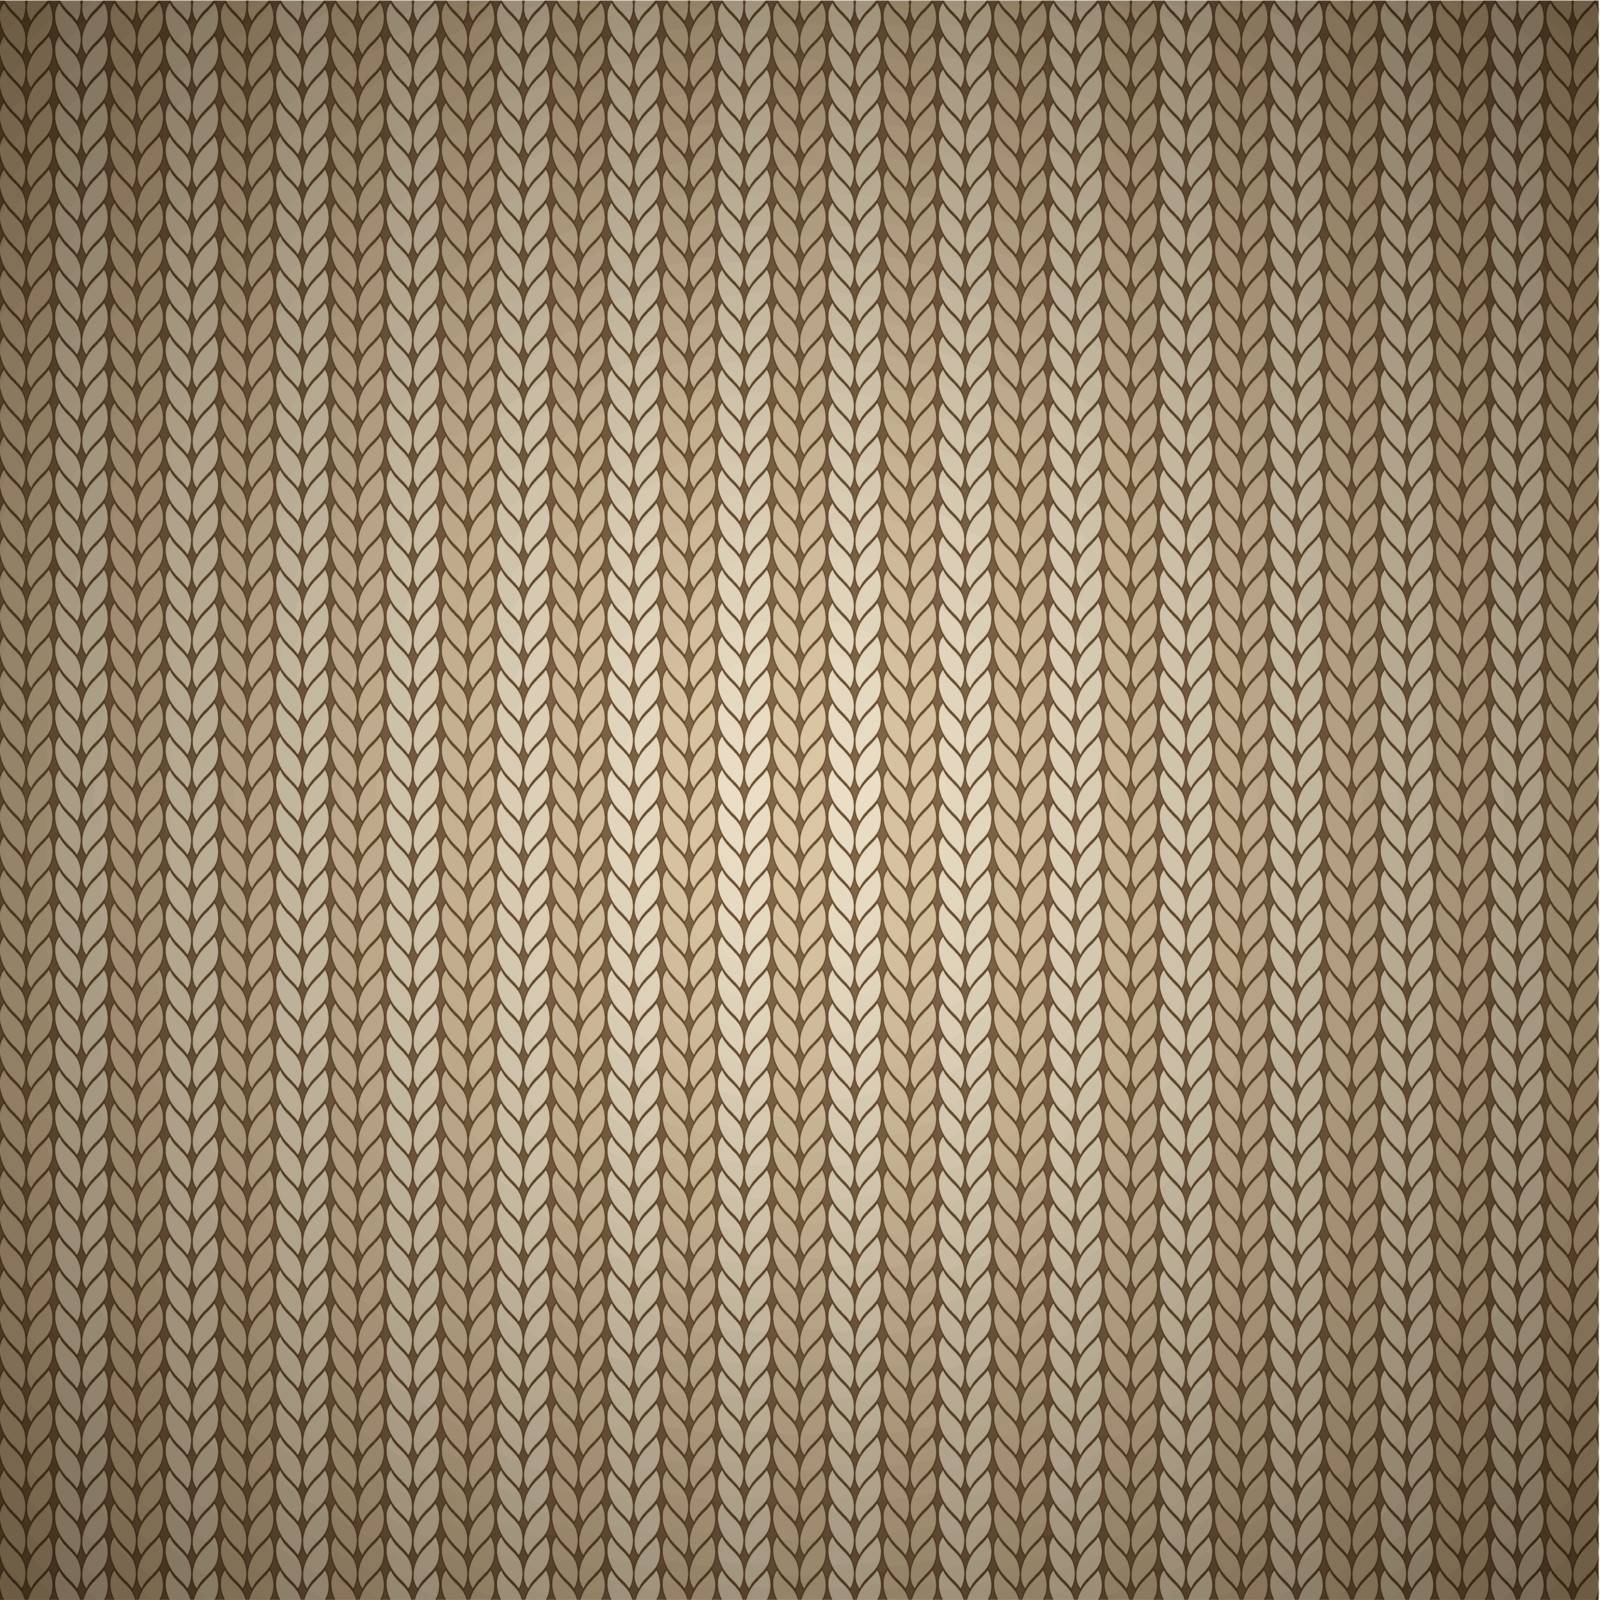 Knitted fabric texture by vtorous